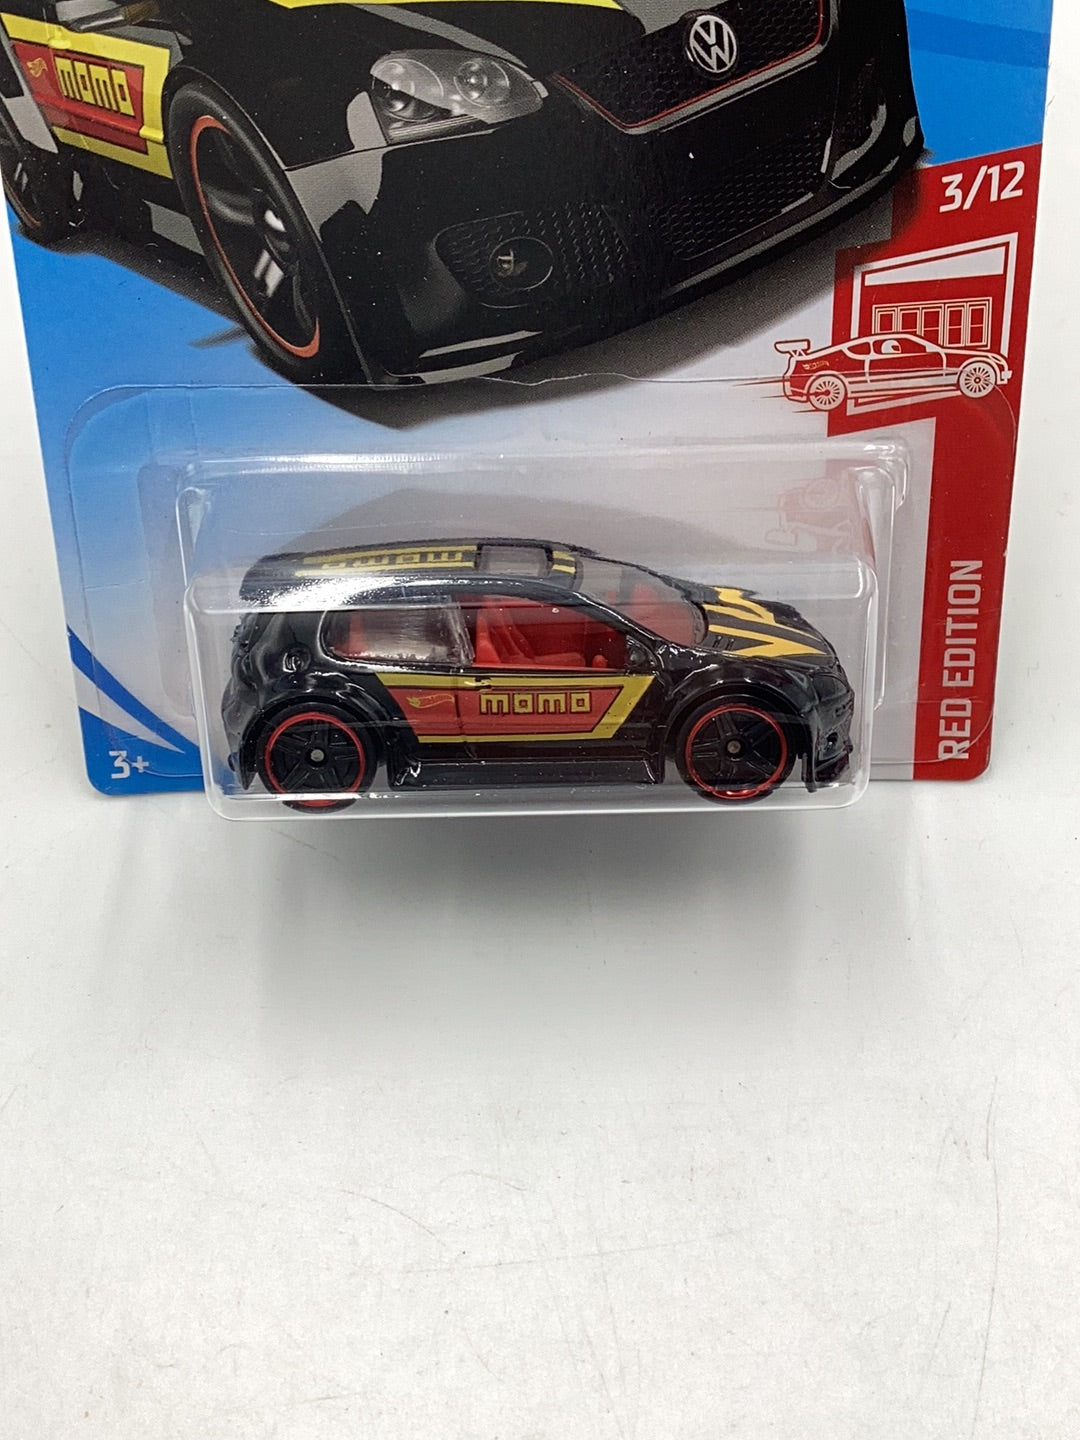 2019 Hot Wheels Factory Sealed Red Edition Volkswagen Golf GTI 19/250 150G